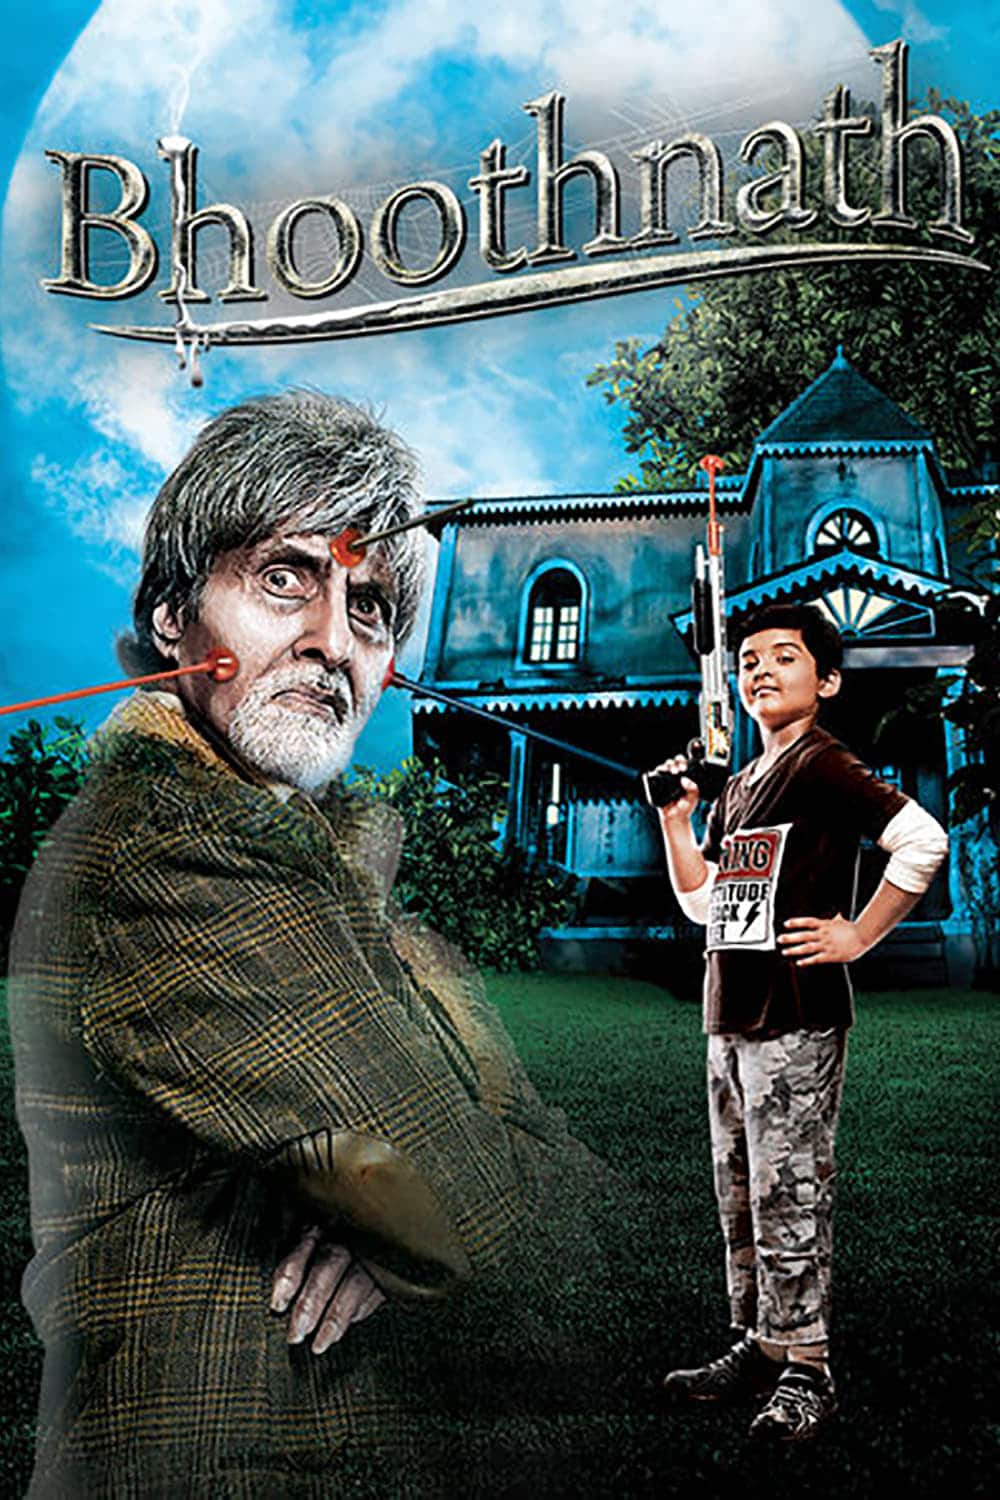 Poster for the movie "Bhoothnath"